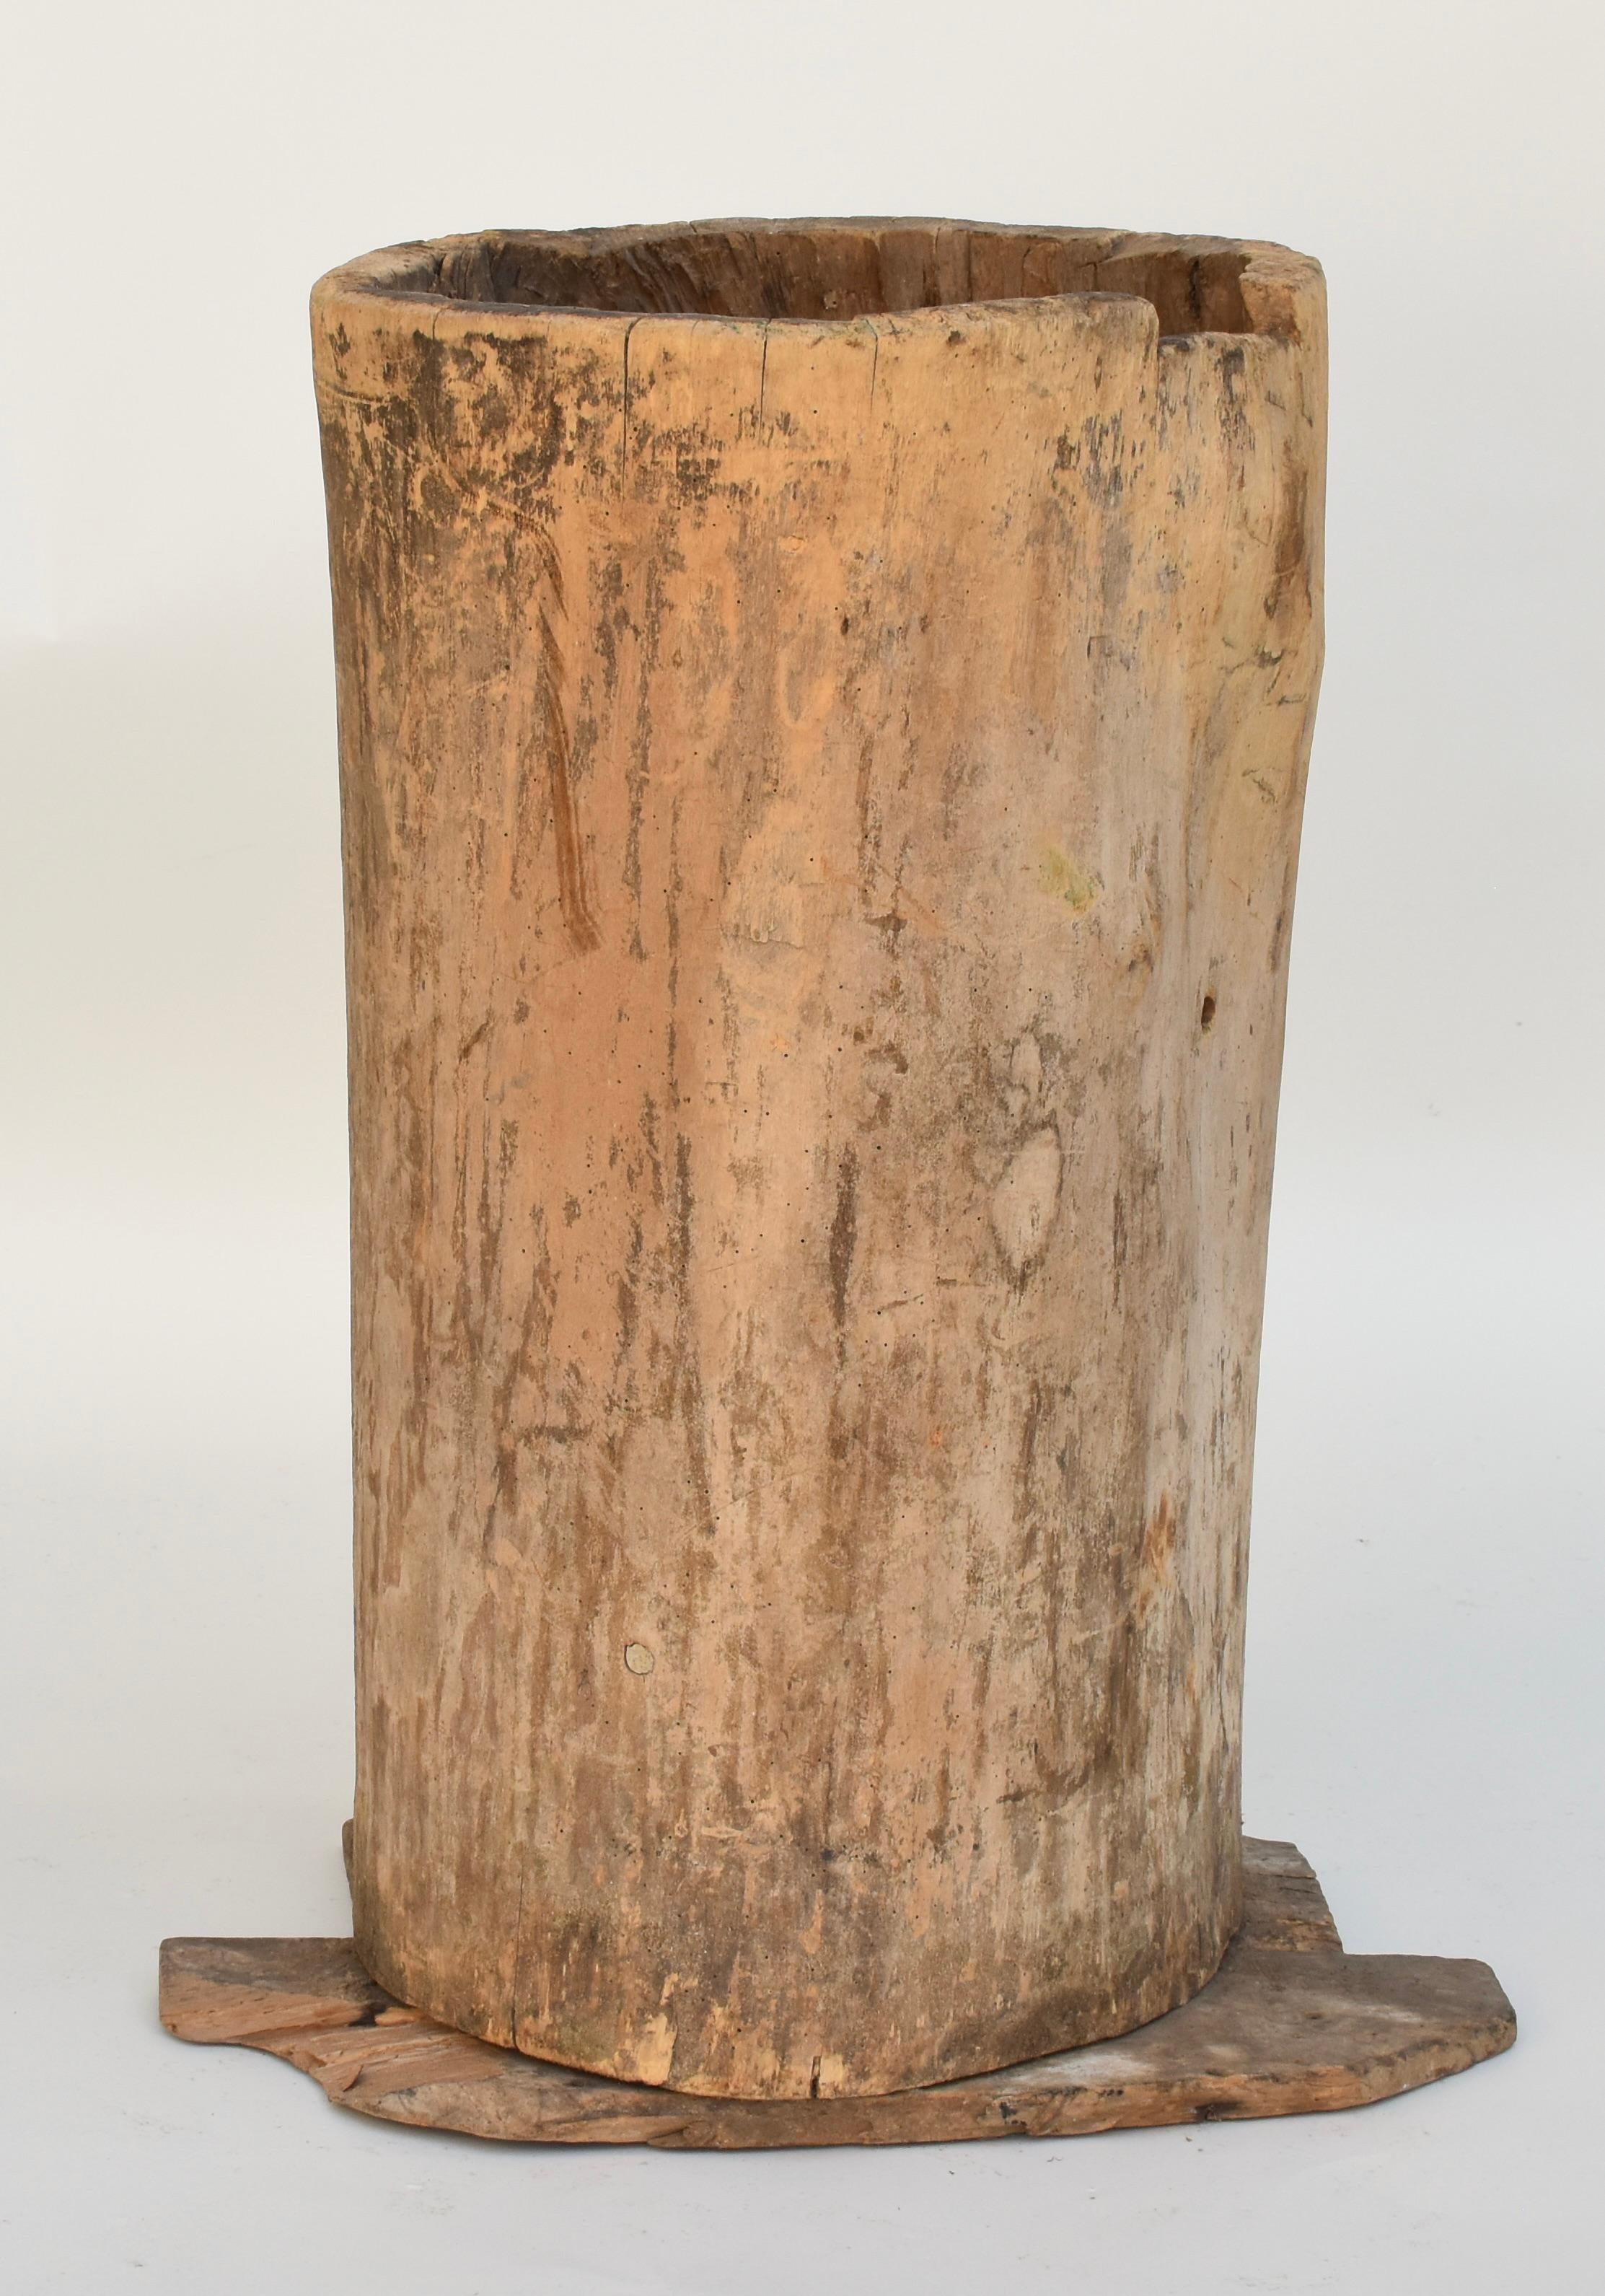 French Antique Hollowed Tree Trunk Wooden Planter Vessel, Late 19th C. France For Sale 1